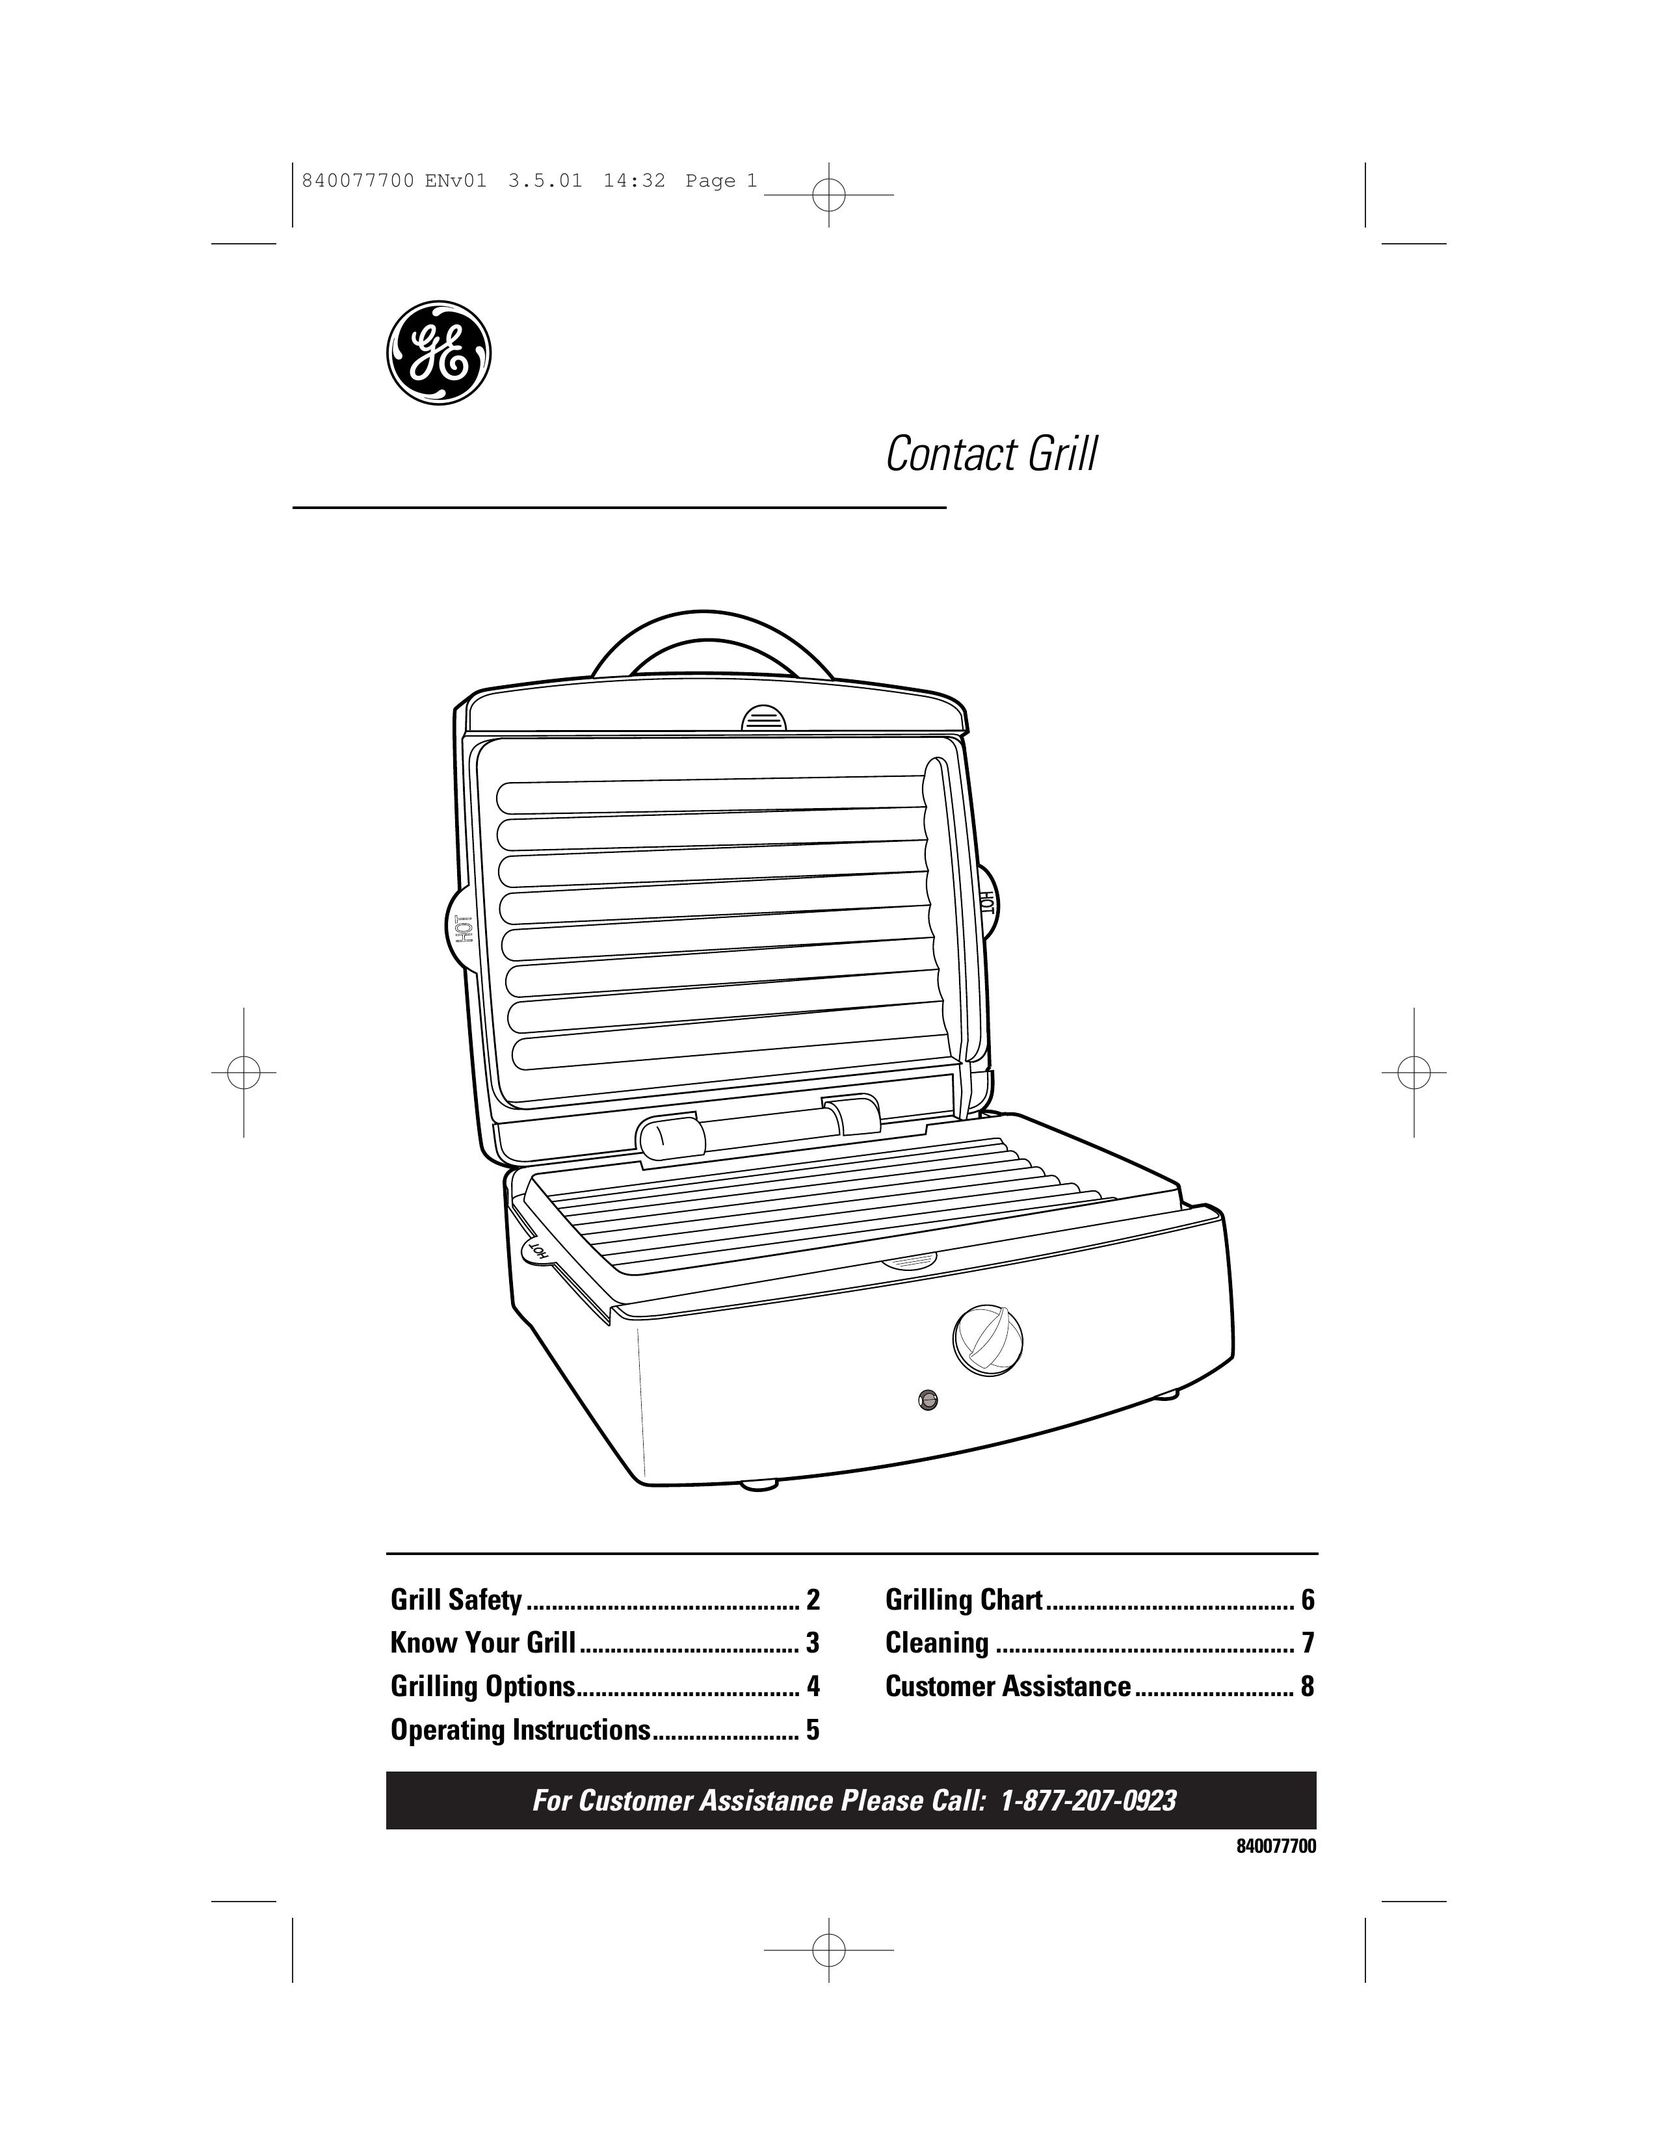 GE 106642 Kitchen Grill User Manual